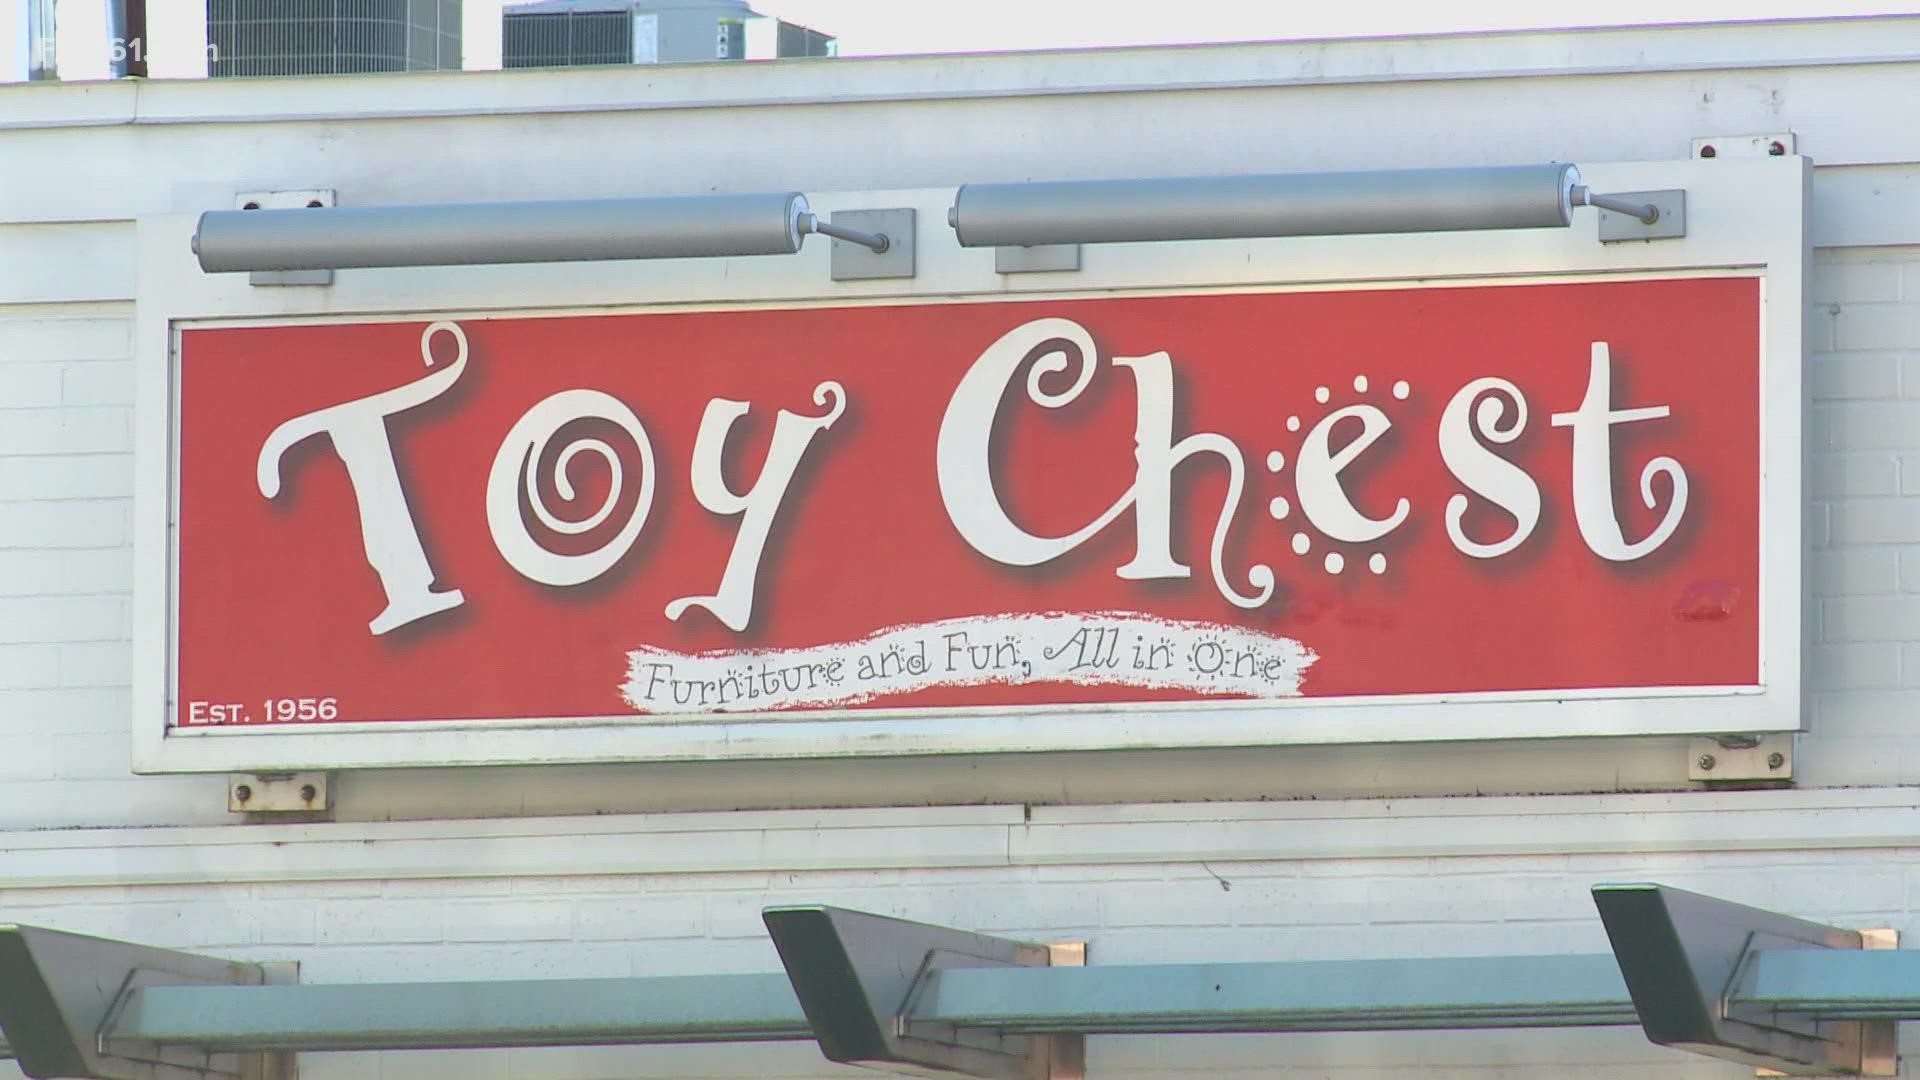 A West Hartford institution is closing after 66 years of serving the public. The owner of the Toy Chest on Farmington Avenue told customers the news Friday.